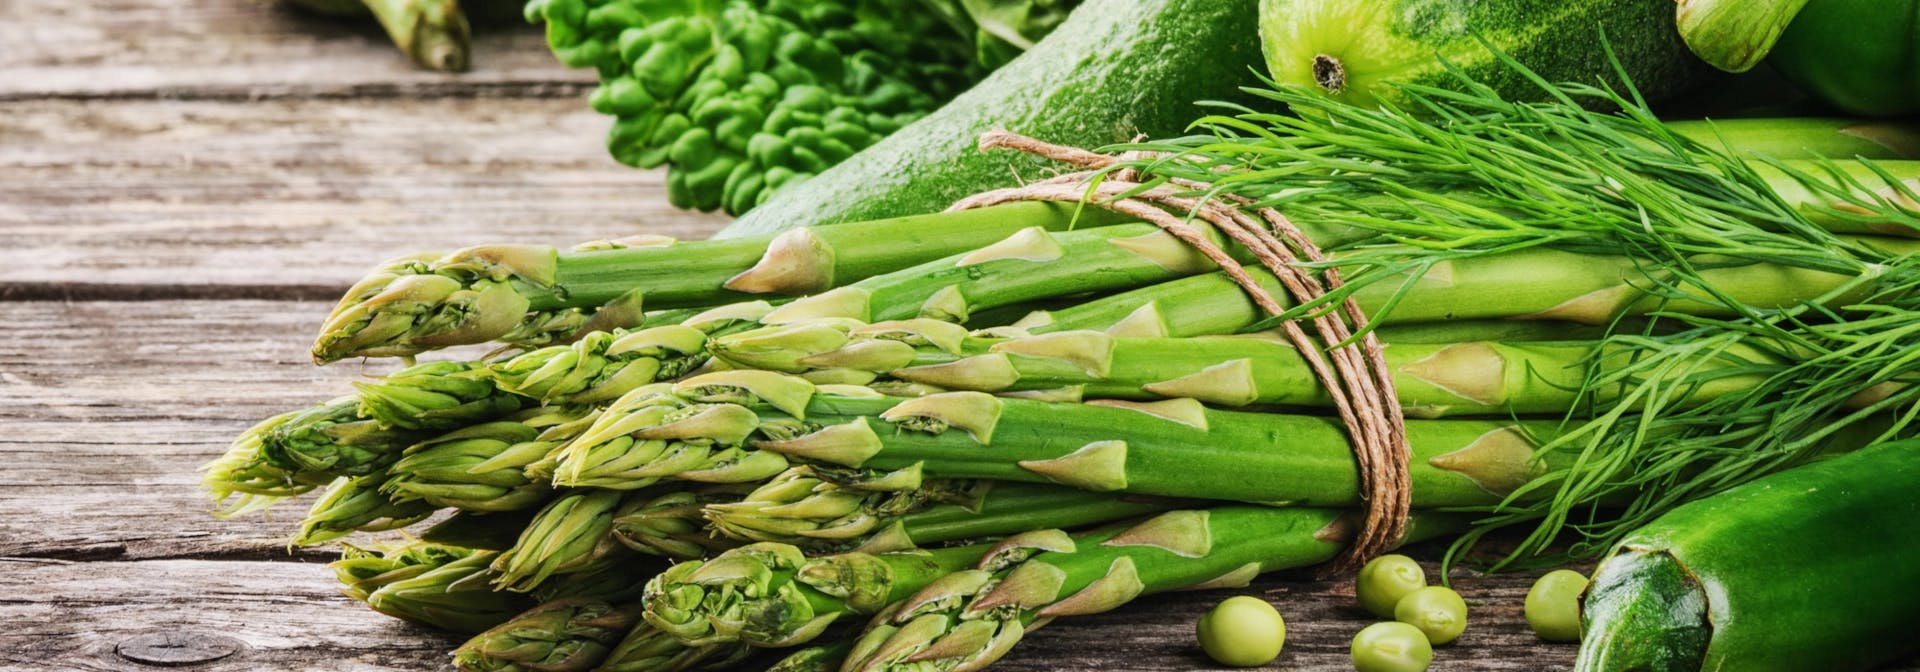 Banner image of asparagus and other vegetables